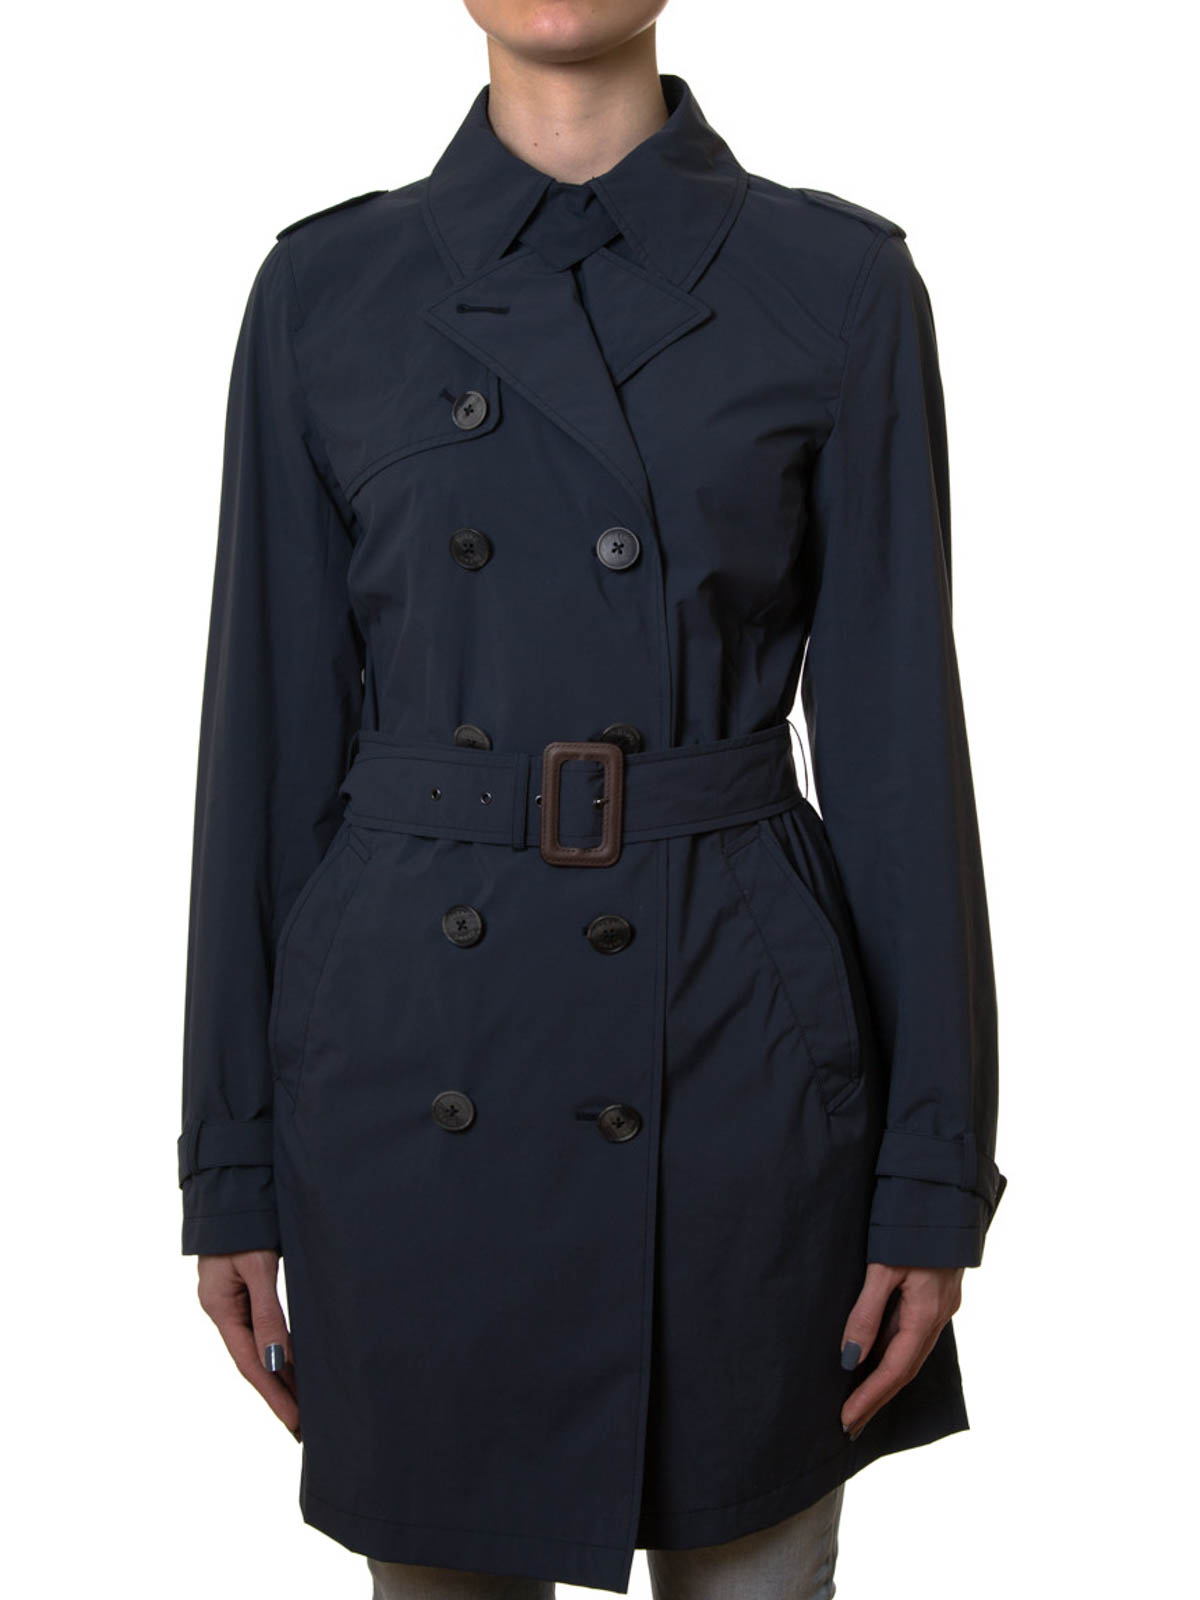 Double-breasted trench coat by Herno - trench coats | iKRIX